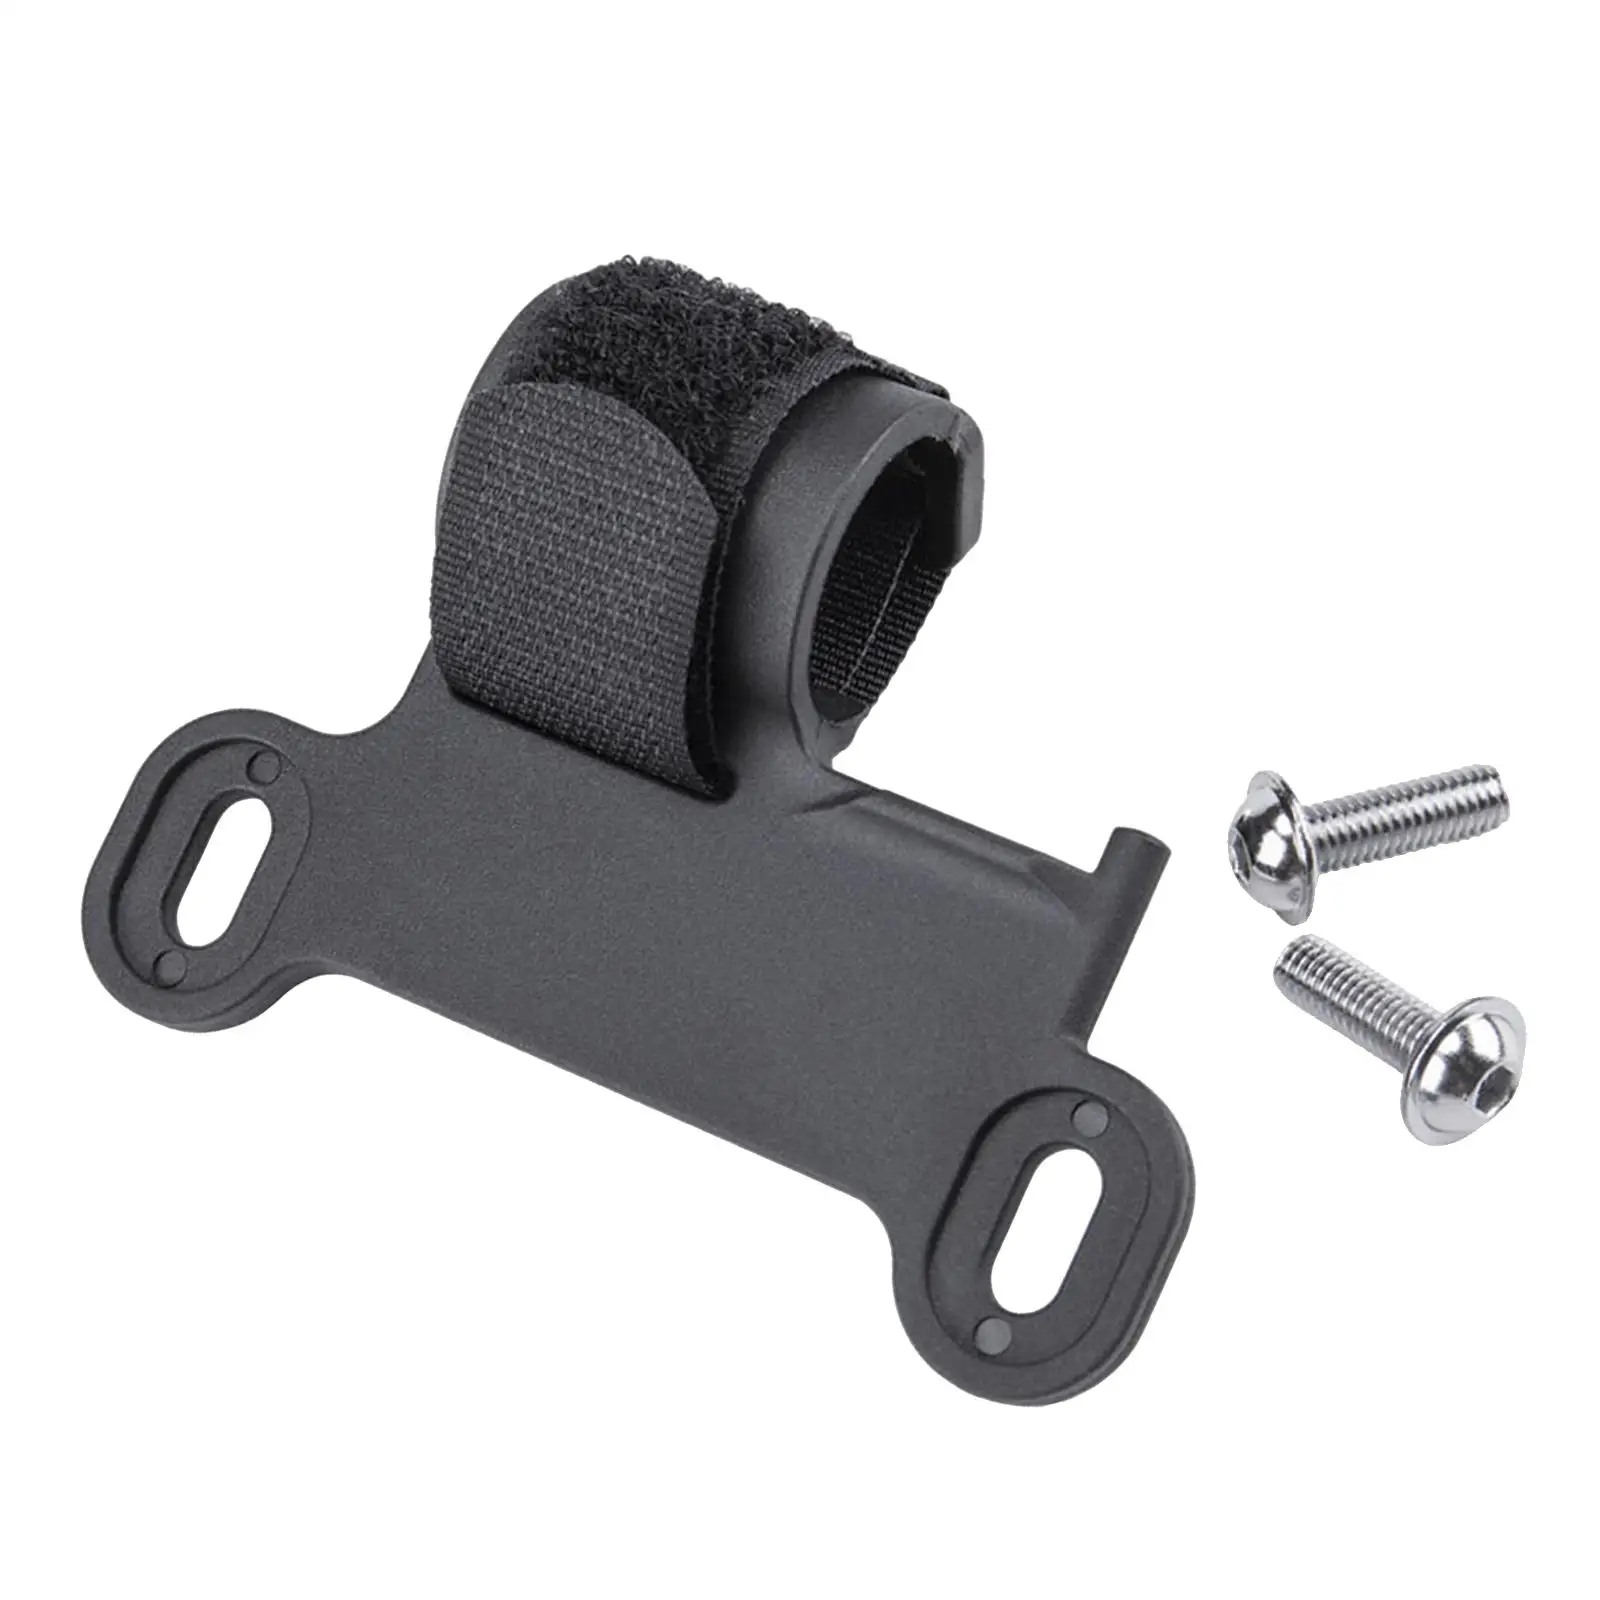 1Piece Bicycle Pump Holder Bracket Accessories Fixed Clip Supplies with Adjustable Band Parts Tool Frame for Mountain Road Bike